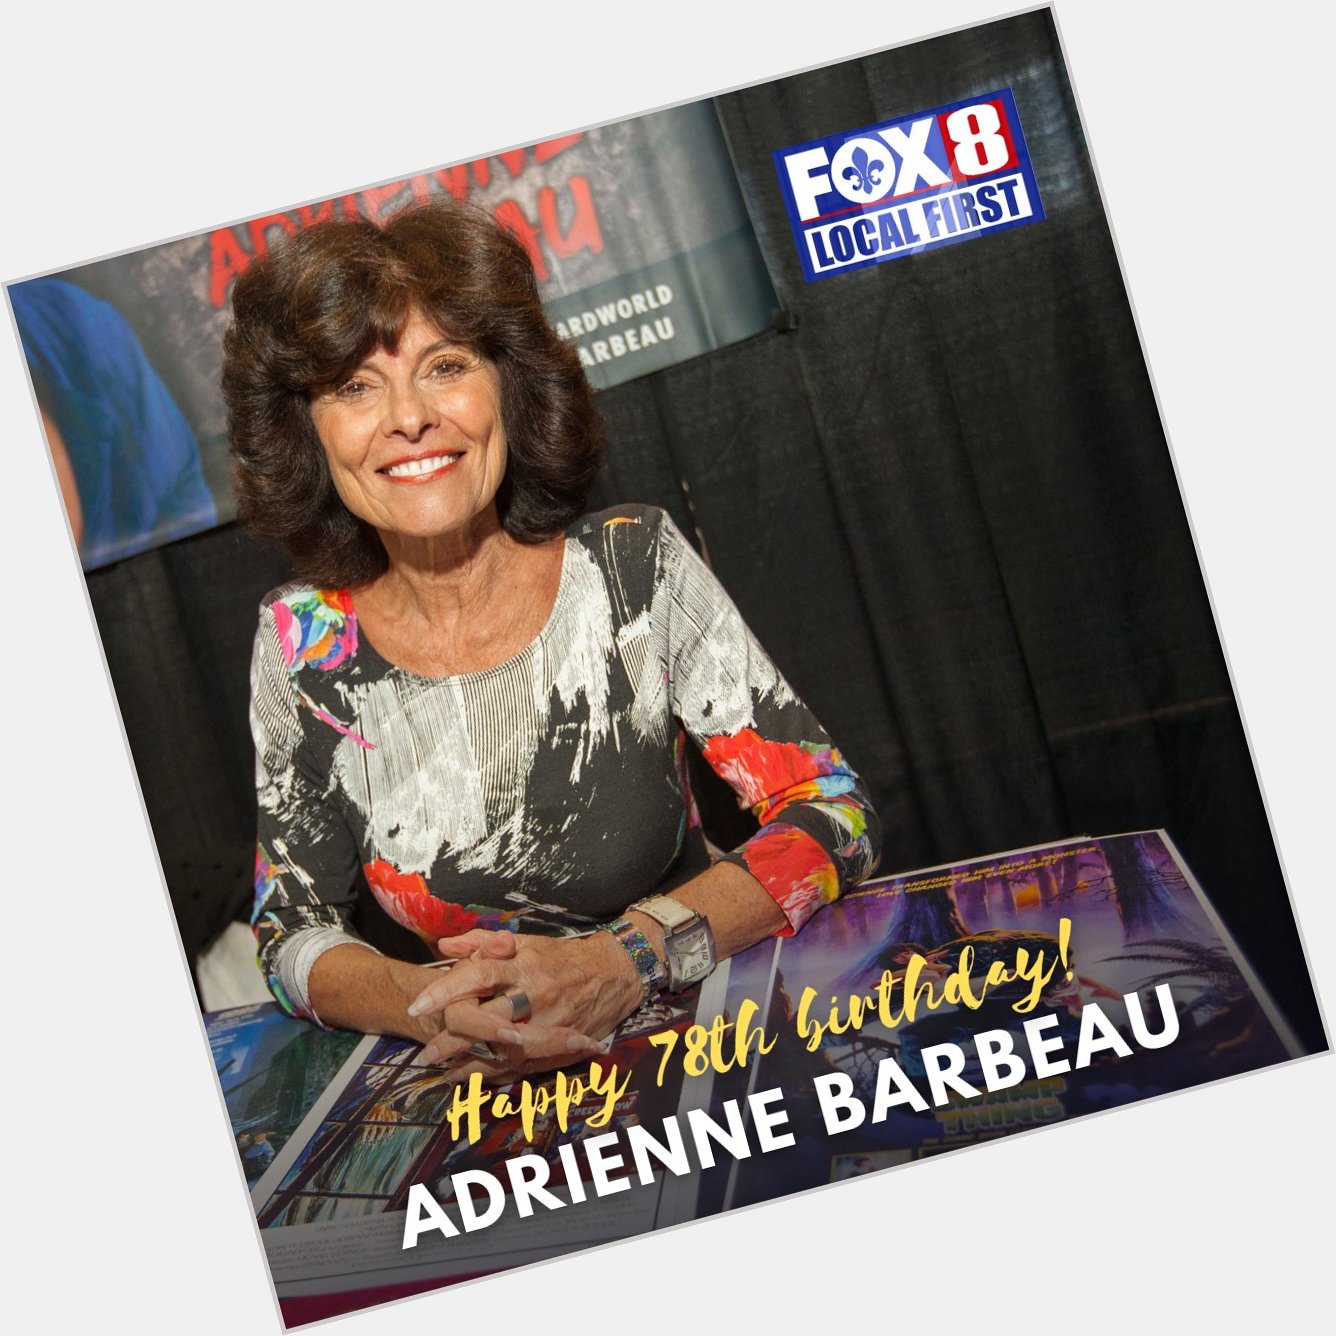 Happy birthday to actress Adrienne Barbeau, who turned 78 on Sunday! 